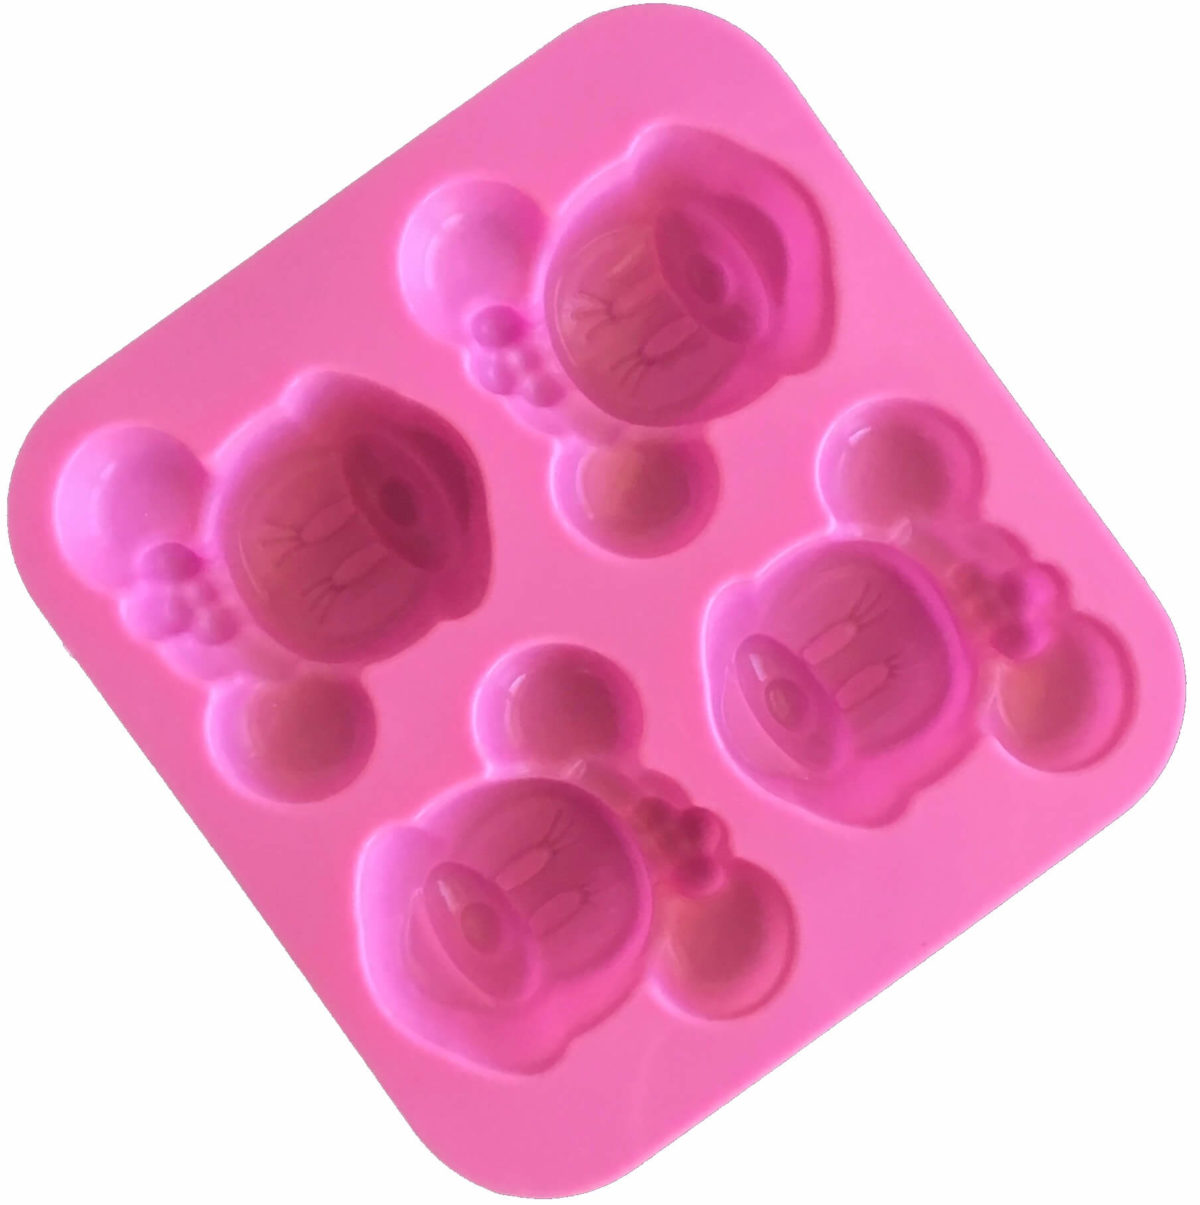 back of pink four cavity silicone mould with identical minnie mouse cavites